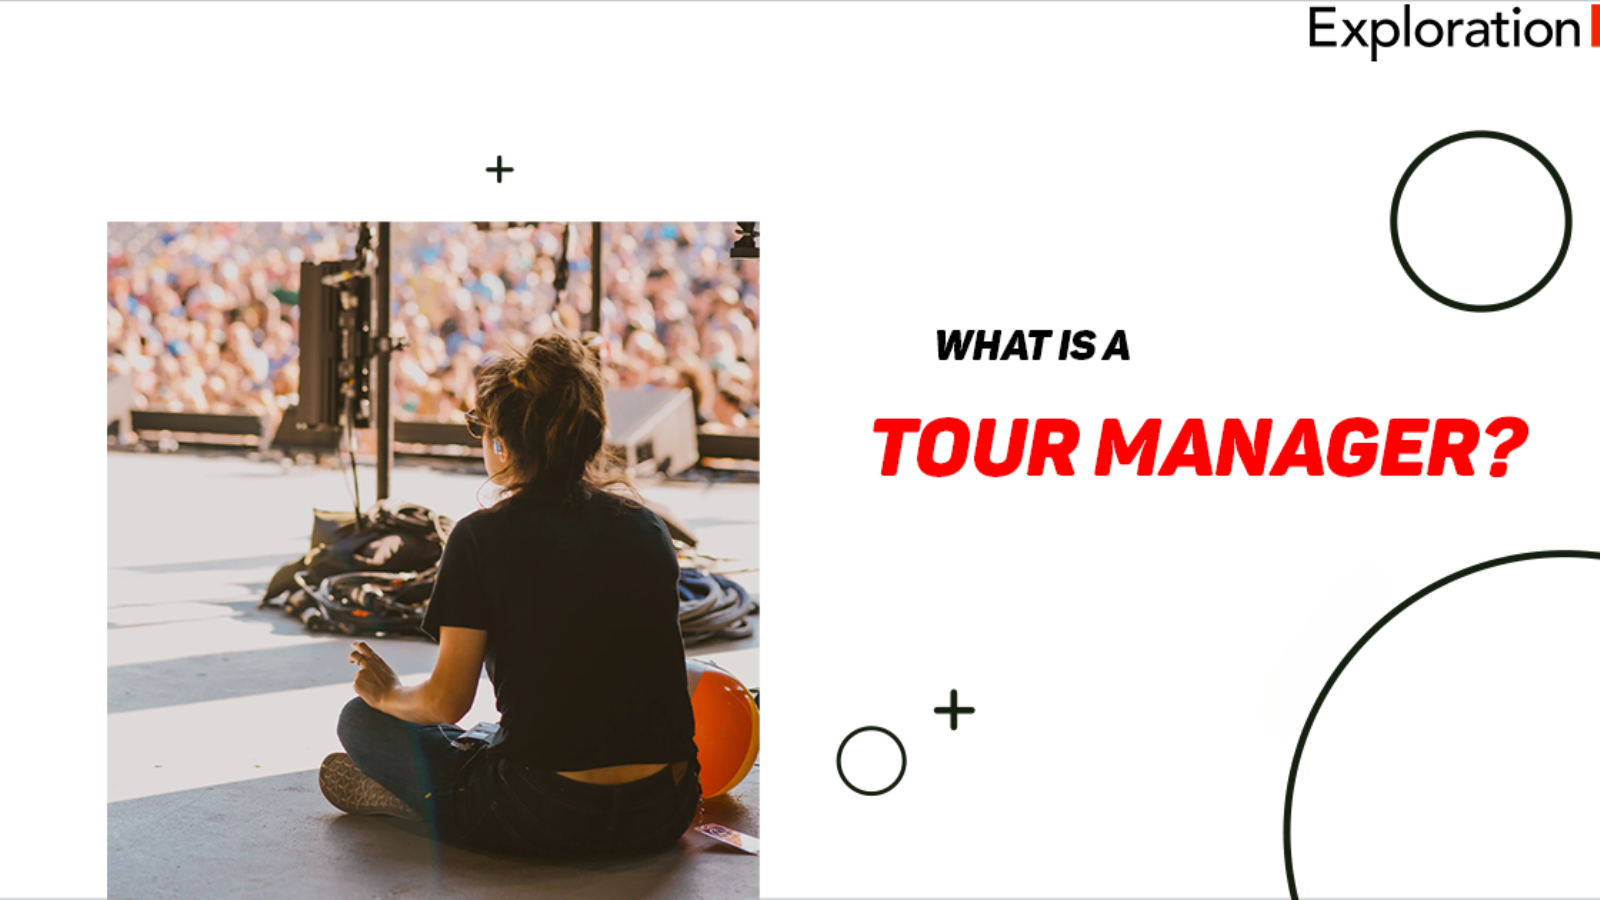 What is a Tour Manager?